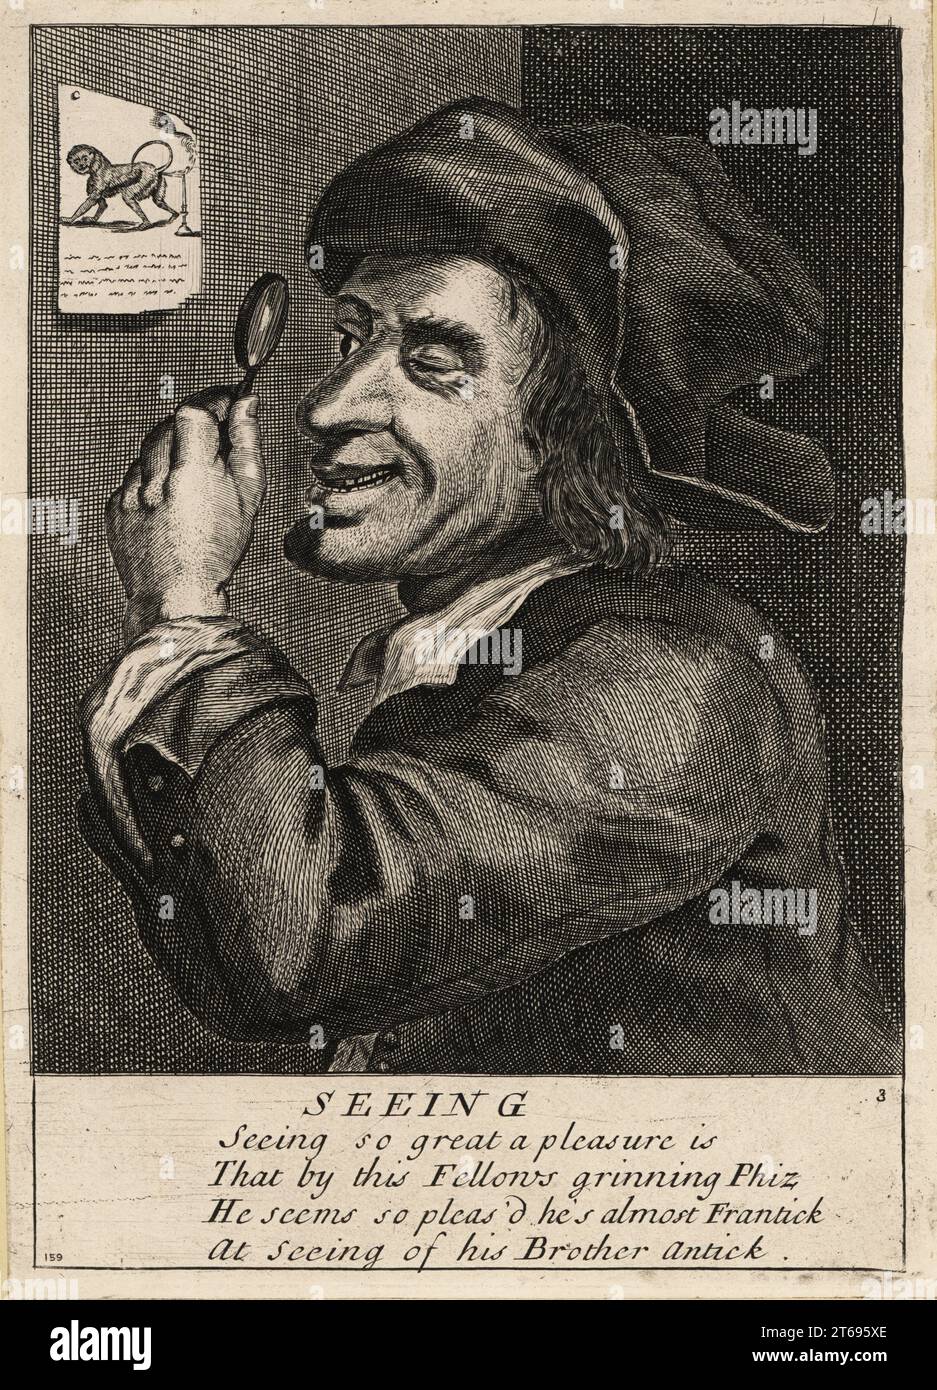 17th century English man looking through a magnifying glass at an engraving of a monkey extinguishing a candle with a fart. Seeing. Seeing so great a pleasure is That by this fellows grinning phiz, He seems so pleas'd he's almost frantick At seeing of his brother antick. Possibly from an original print in The merry conceited five senses, Robert Walton, 1661. Copperplate engraving by David Deuchar from A Collection of Etchings after the most Eminent Masters of the Dutch and Flemish Schools, Edinburgh, 1803. Stock Photo